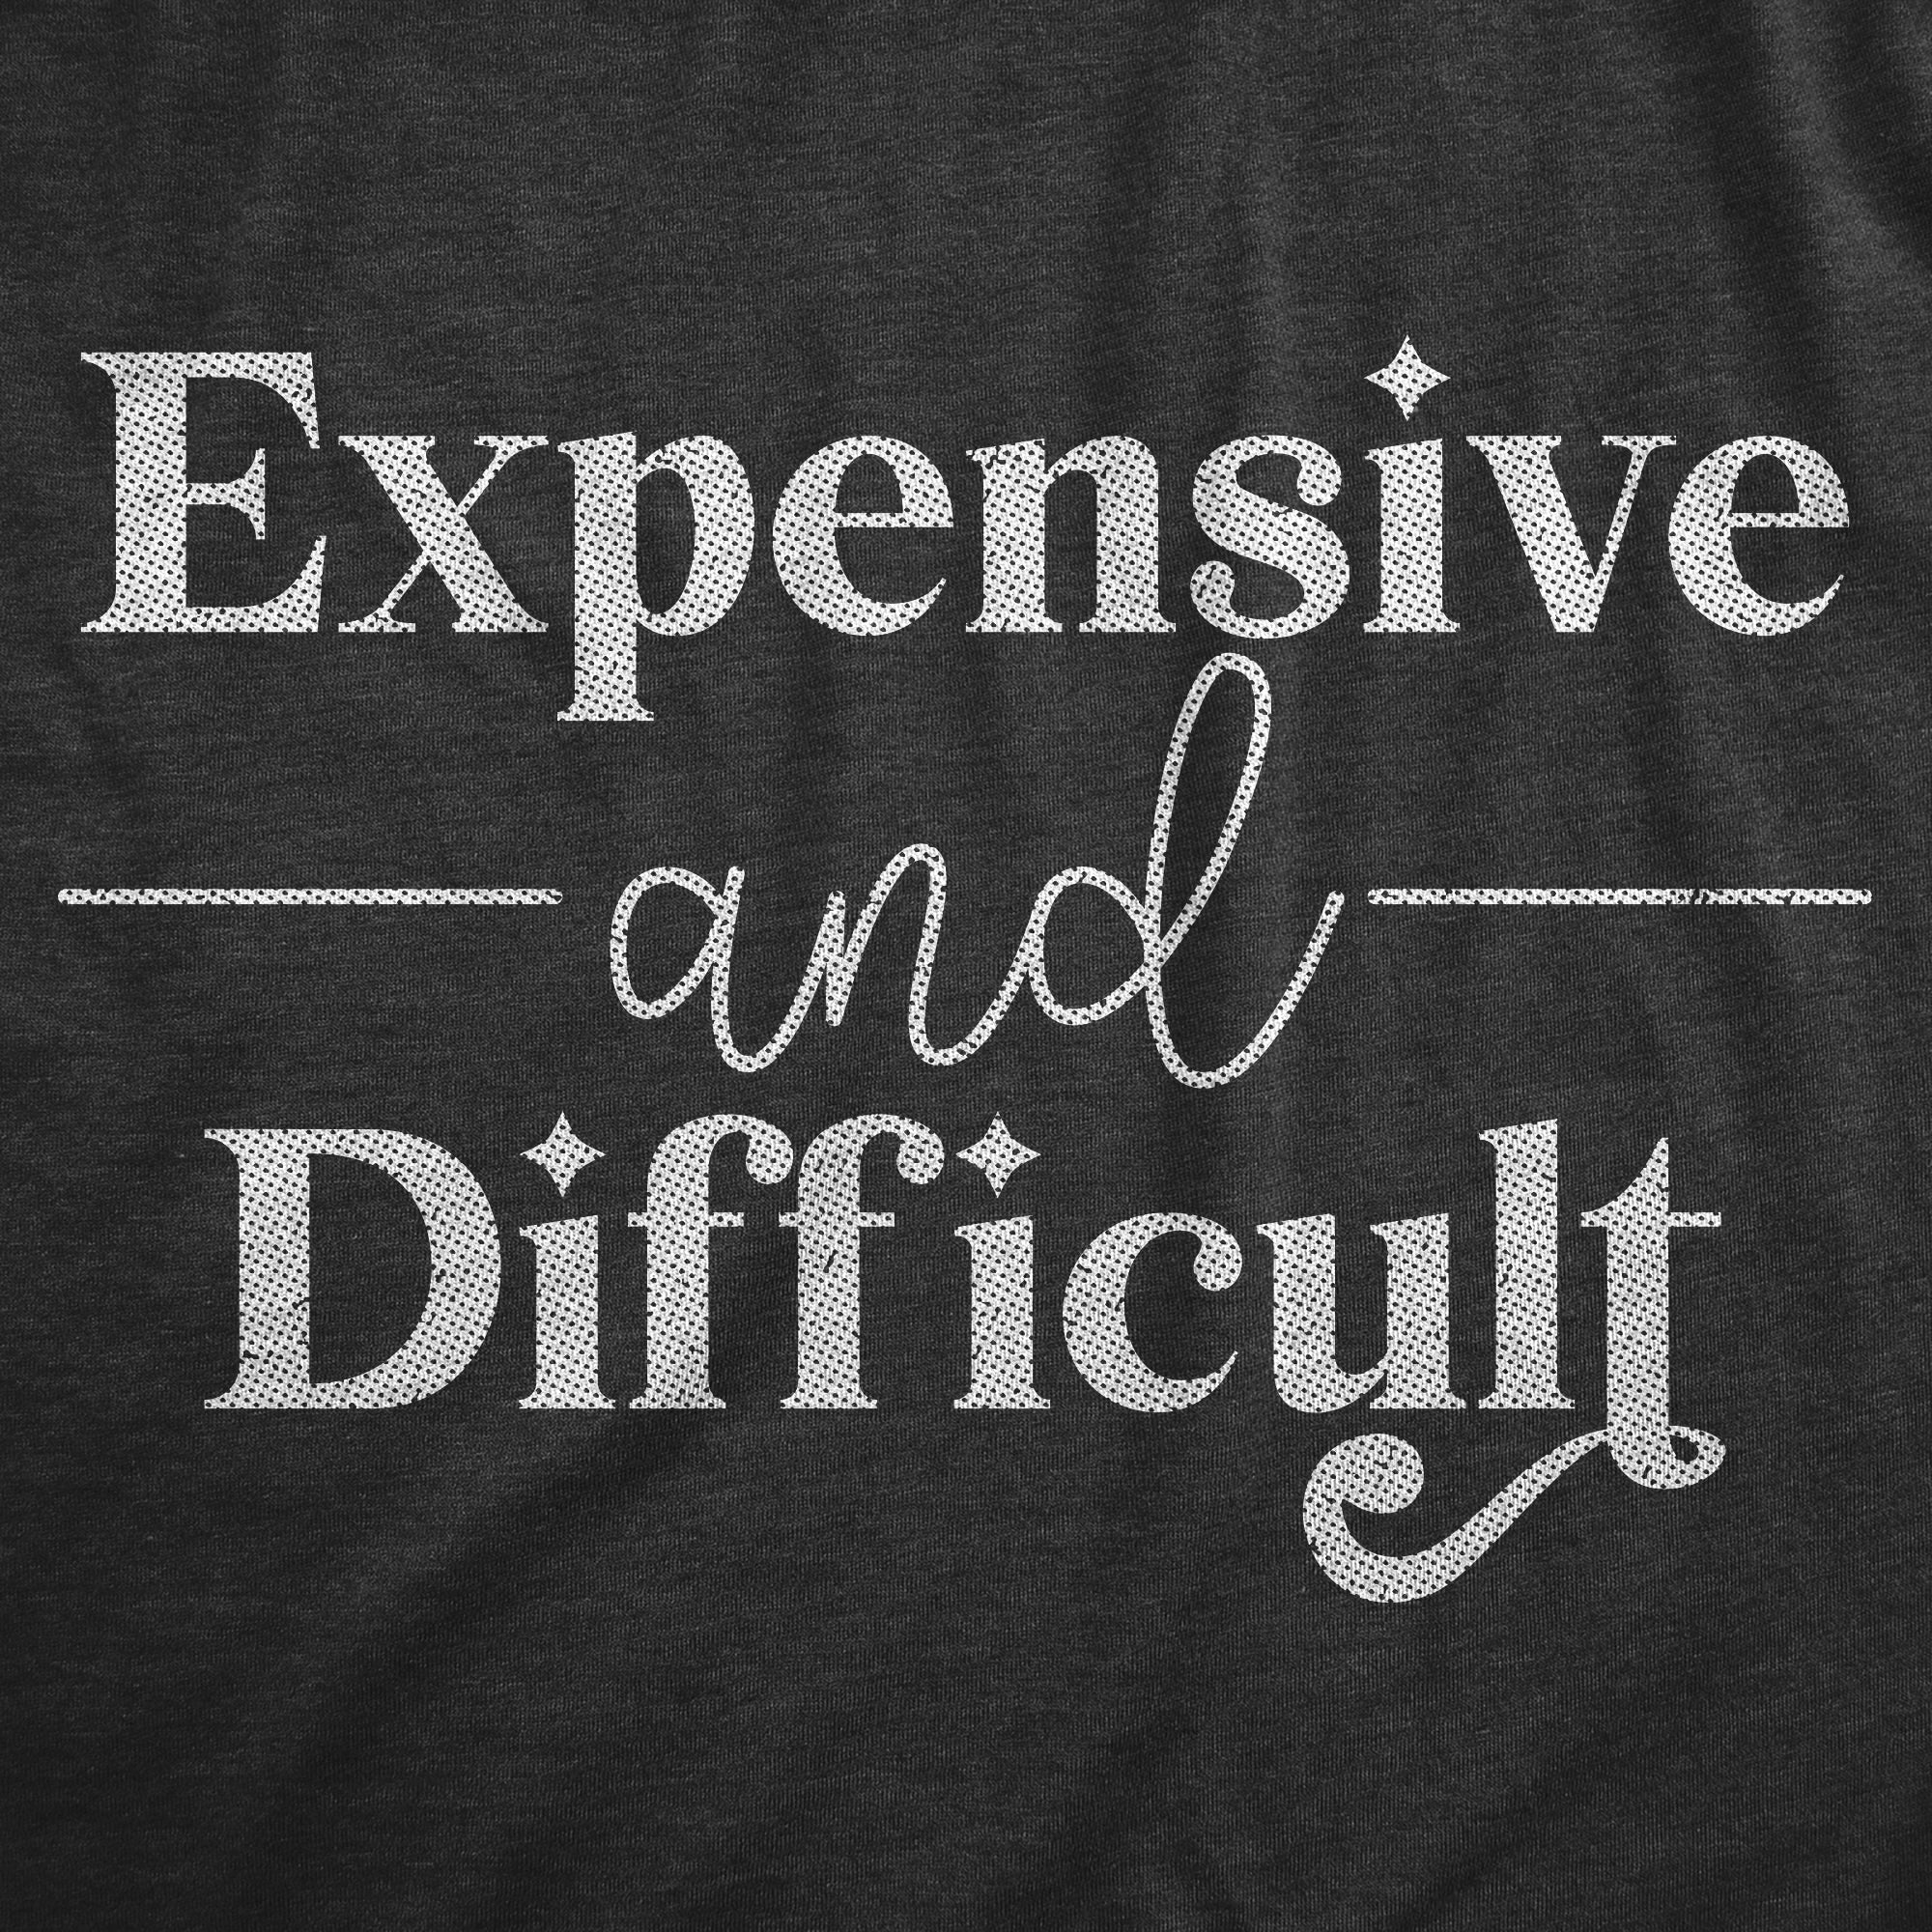 Funny Heather Black - DIFFICULT Expensive And Difficult Onesie Nerdy Sarcastic Tee